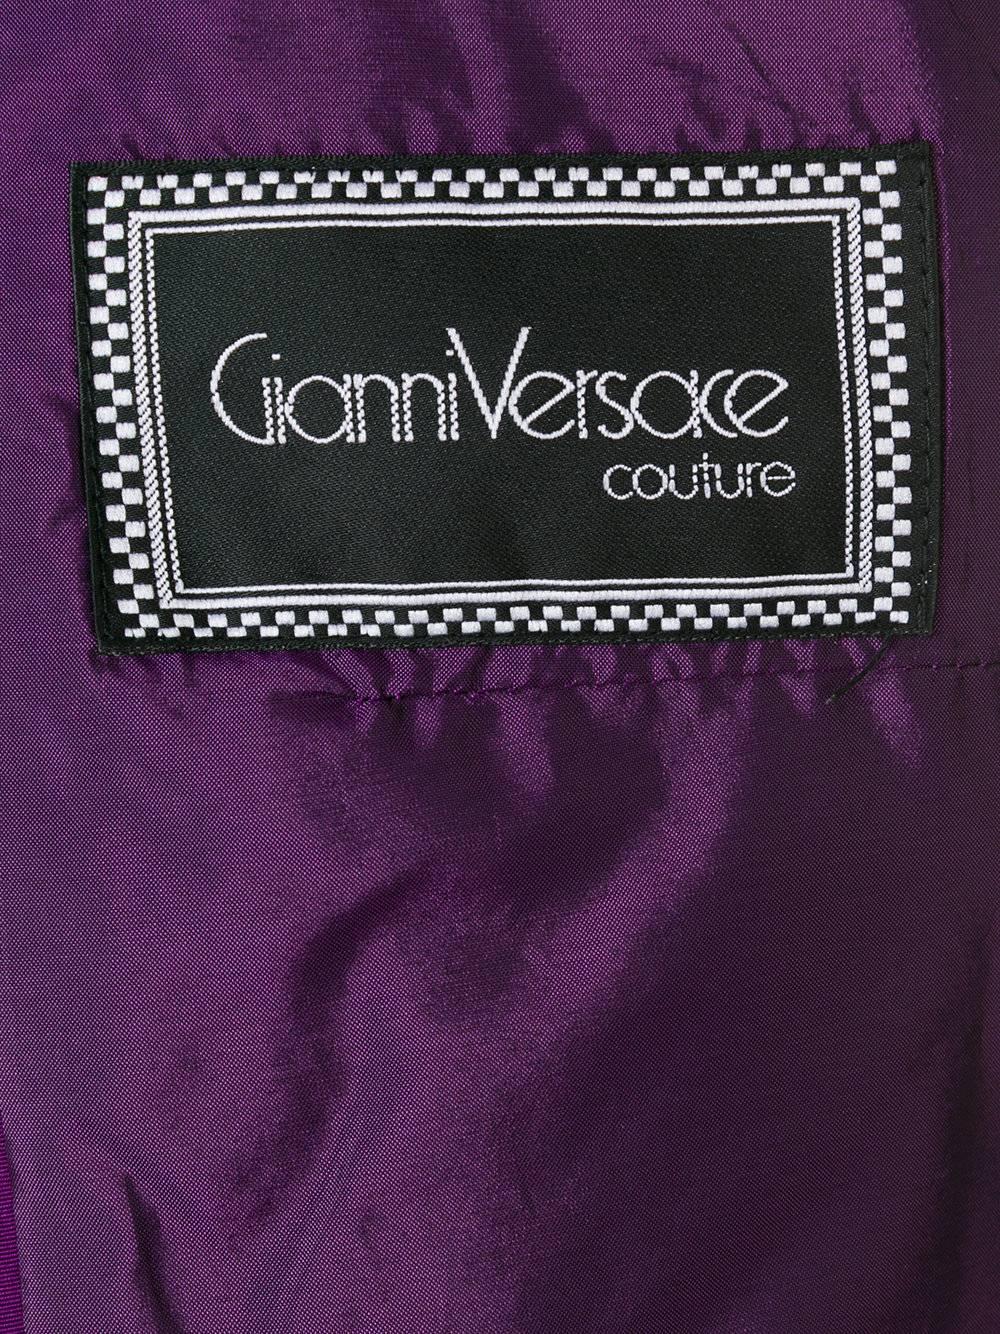 Women's 1990s GIANNI VERSACE rose print jacket For Sale